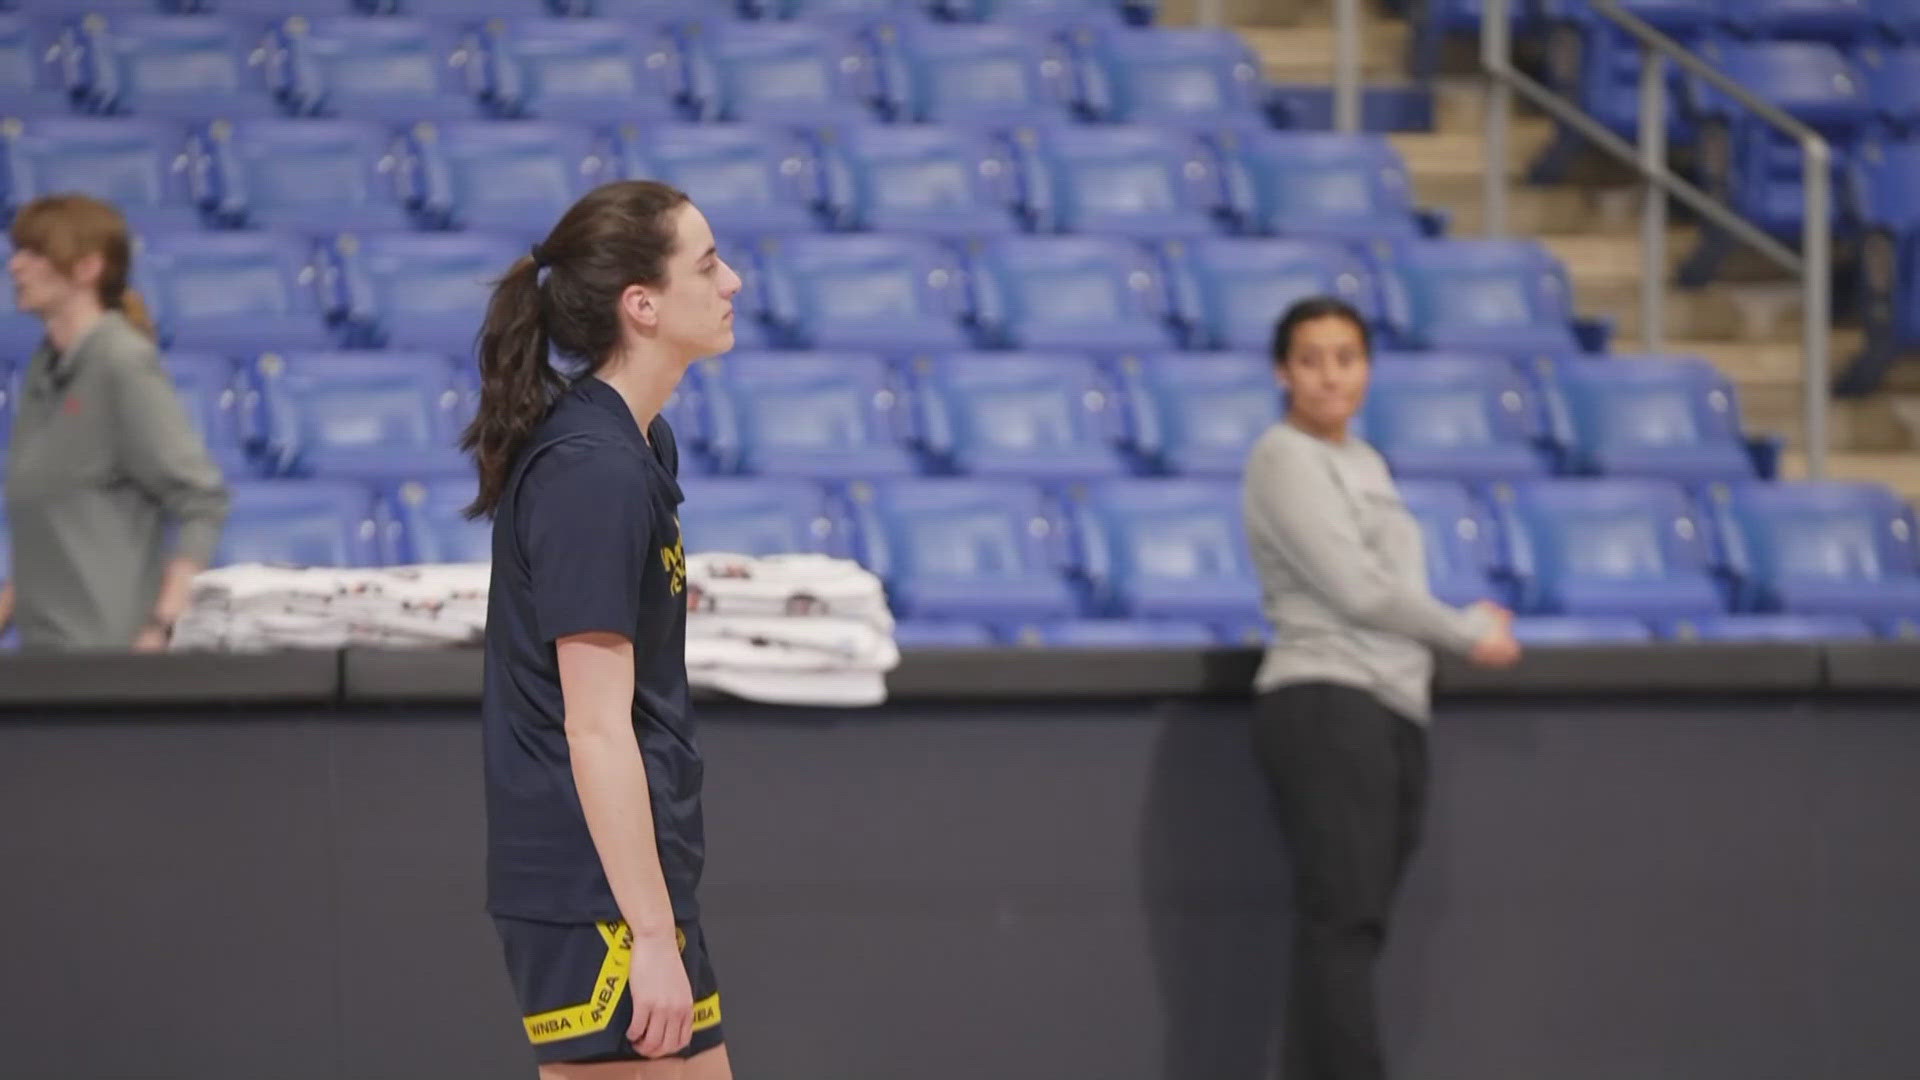 Our sister station, WFAA, reports from Dallas ahead of the Indiana Fever's first preseason game against the Dallas Wings.